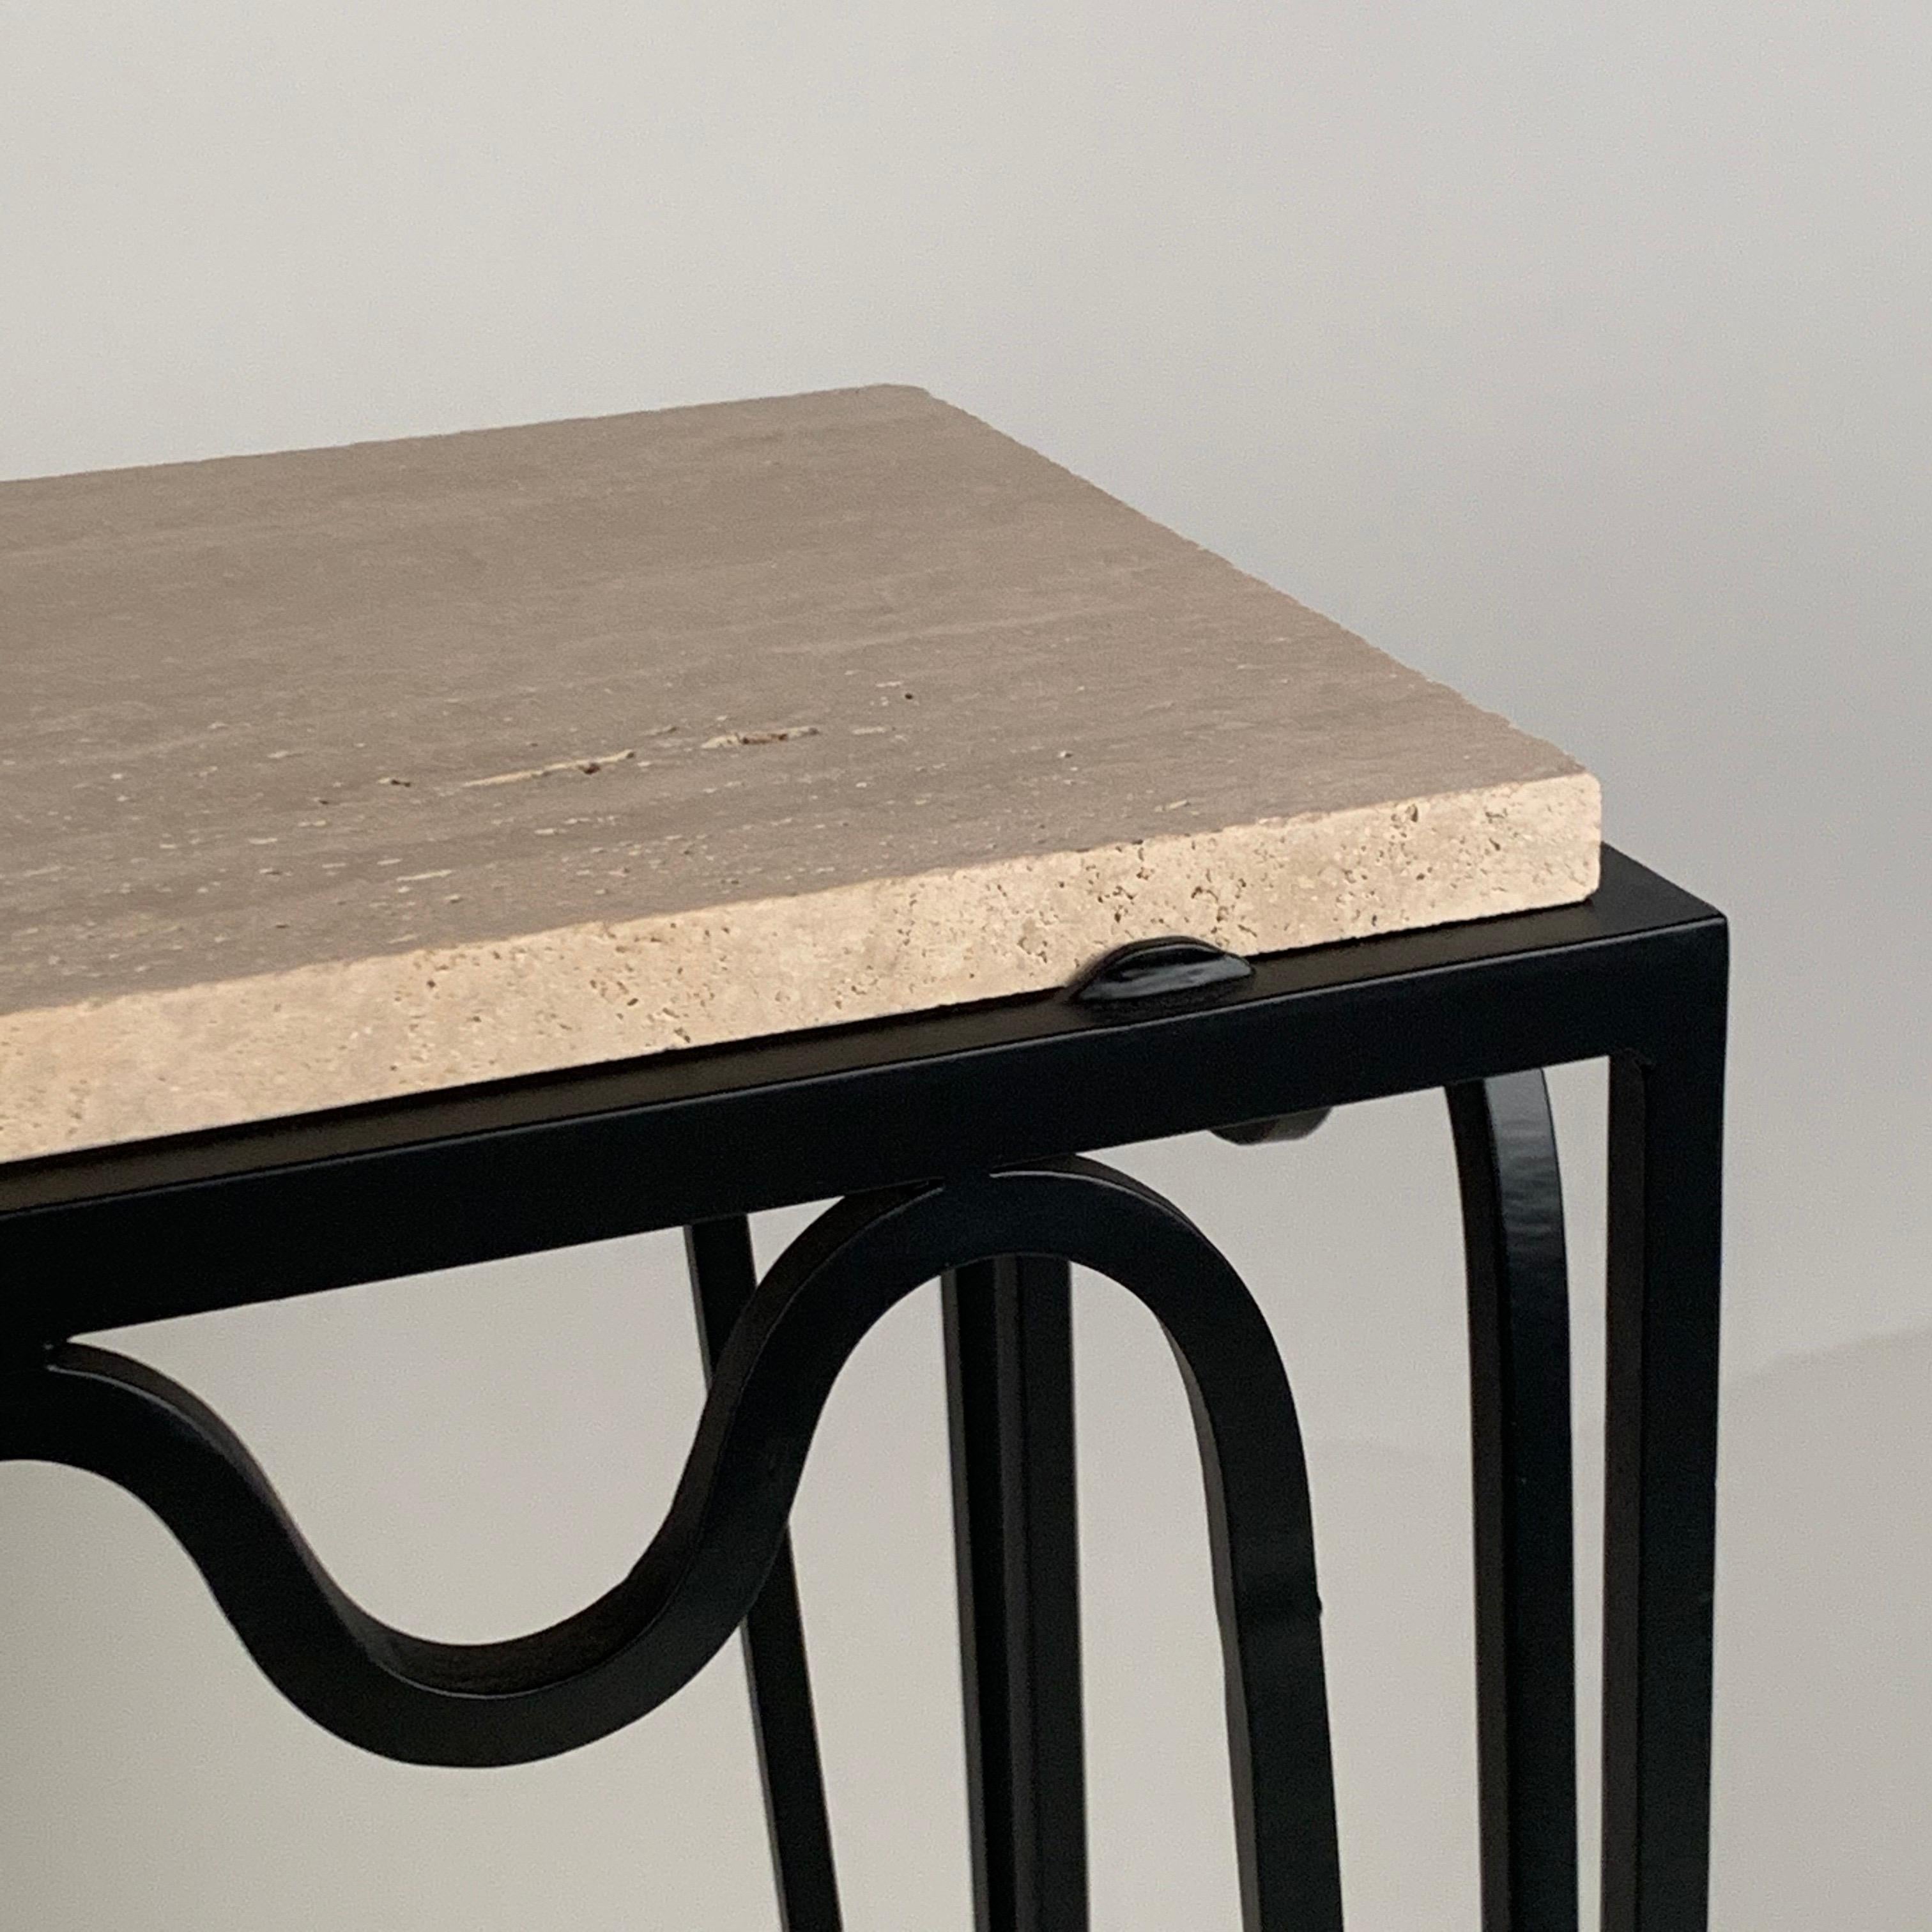 Chic 'Méandre' Travertine Console by Design Frères In New Condition For Sale In Los Angeles, CA